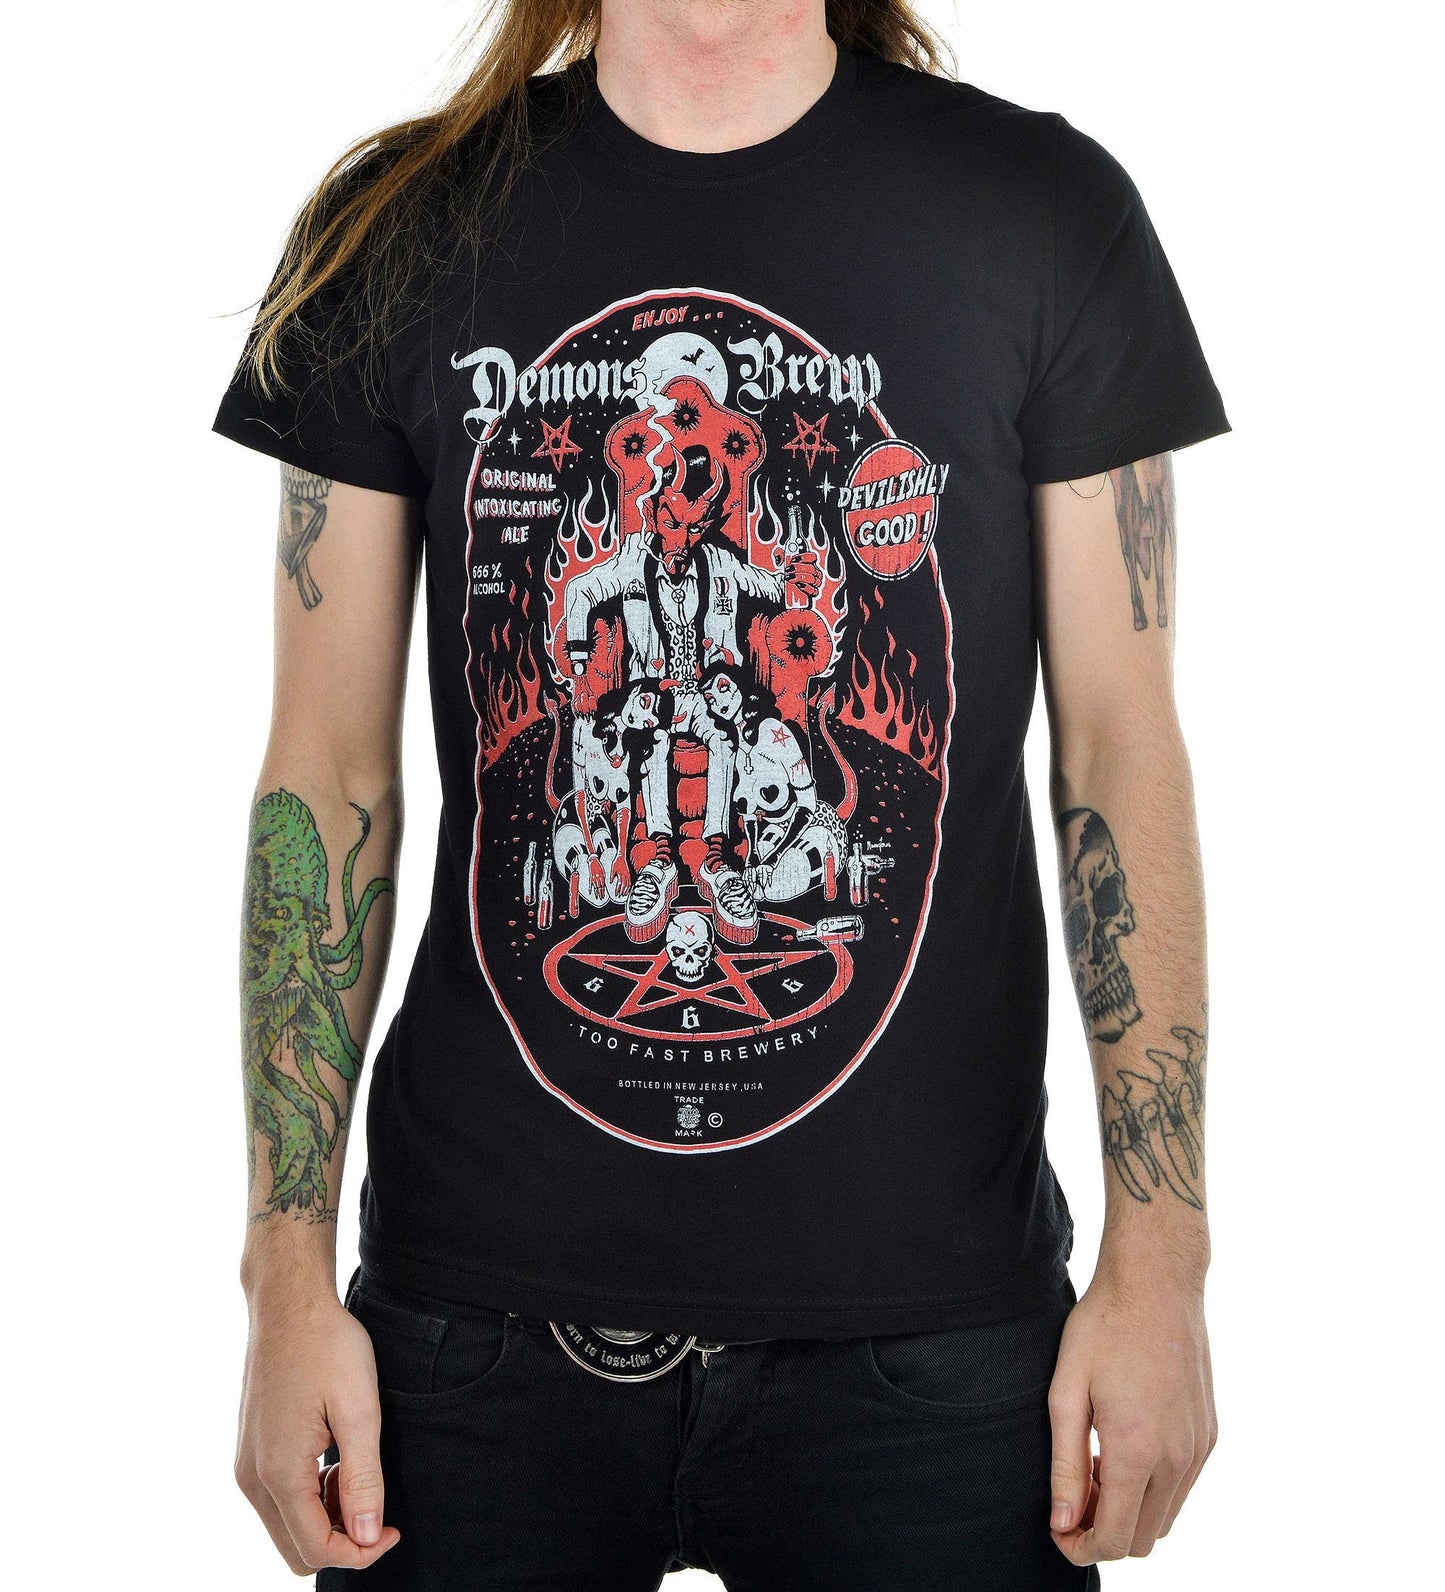 Men's black cotton t-shirt Demon Brew Another Way of Life